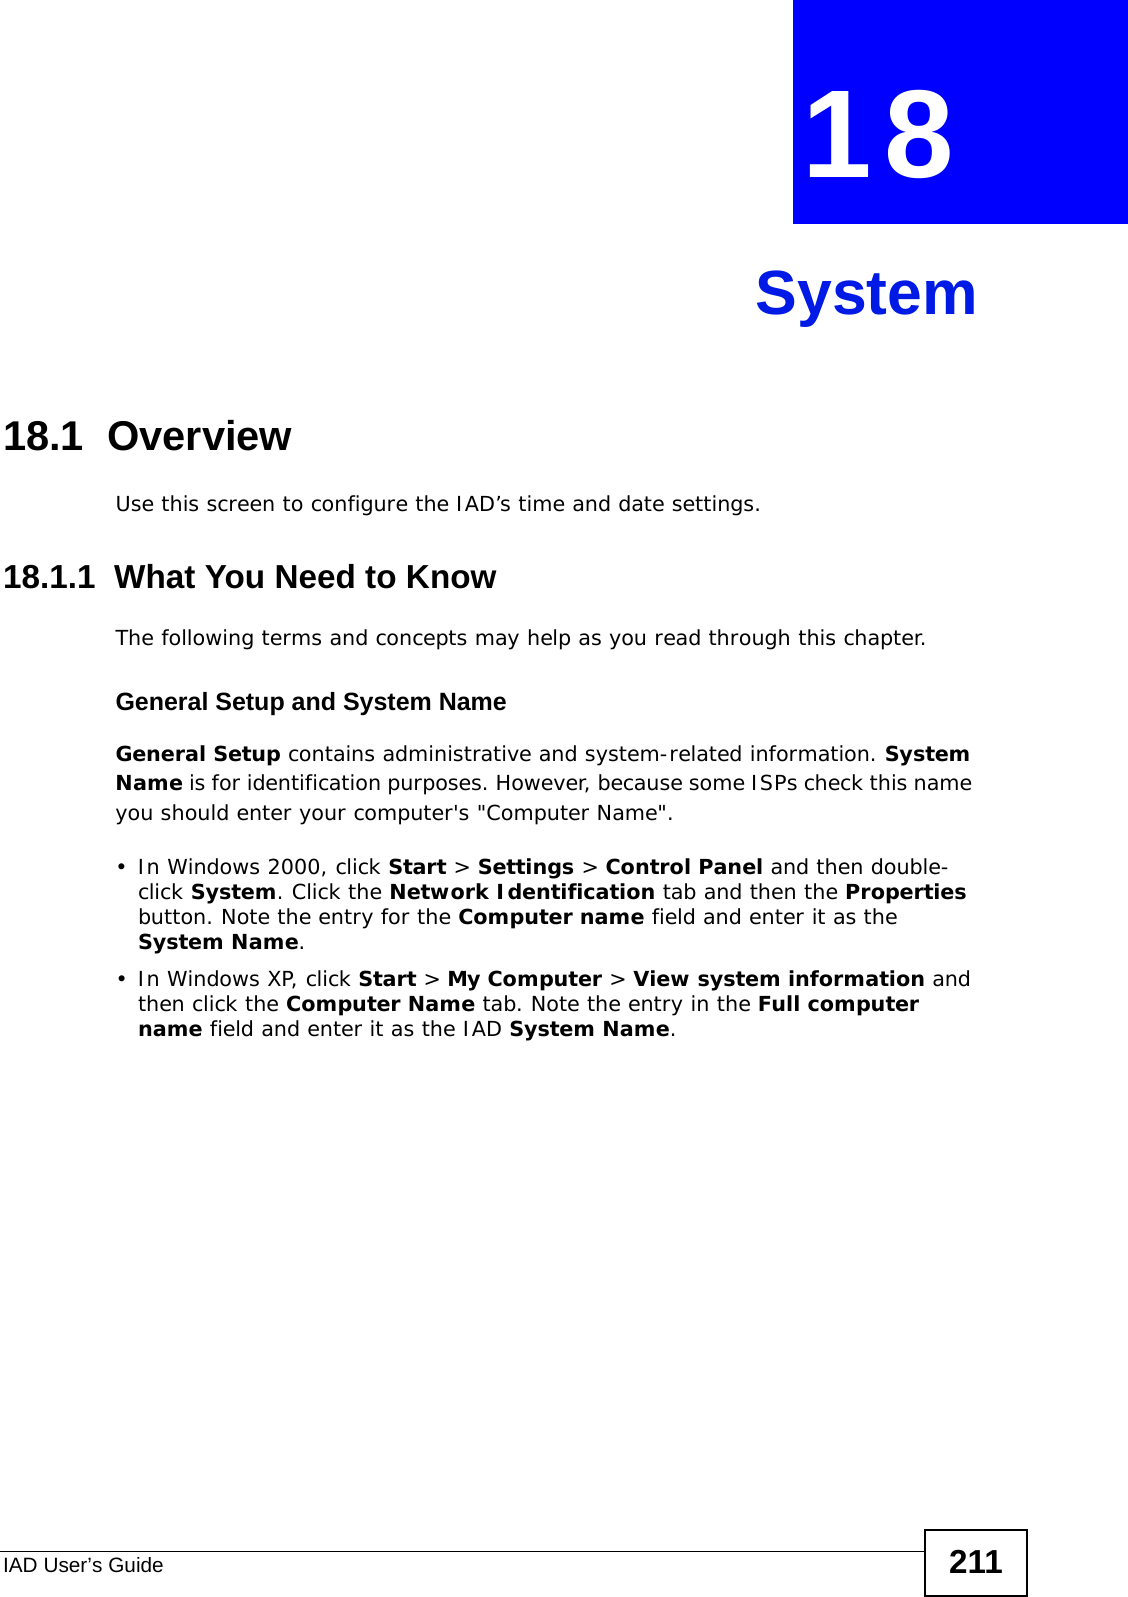 IAD User’s Guide 211CHAPTER  18 System18.1  OverviewUse this screen to configure the IAD’s time and date settings.18.1.1  What You Need to KnowThe following terms and concepts may help as you read through this chapter.General Setup and System NameGeneral Setup contains administrative and system-related information. System Name is for identification purposes. However, because some ISPs check this name you should enter your computer&apos;s &quot;Computer Name&quot;. • In Windows 2000, click Start &gt; Settings &gt; Control Panel and then double-click System. Click the Network Identification tab and then the Properties button. Note the entry for the Computer name field and enter it as the System Name.• In Windows XP, click Start &gt; My Computer &gt; View system information and then click the Computer Name tab. Note the entry in the Full computer name field and enter it as the IAD System Name.